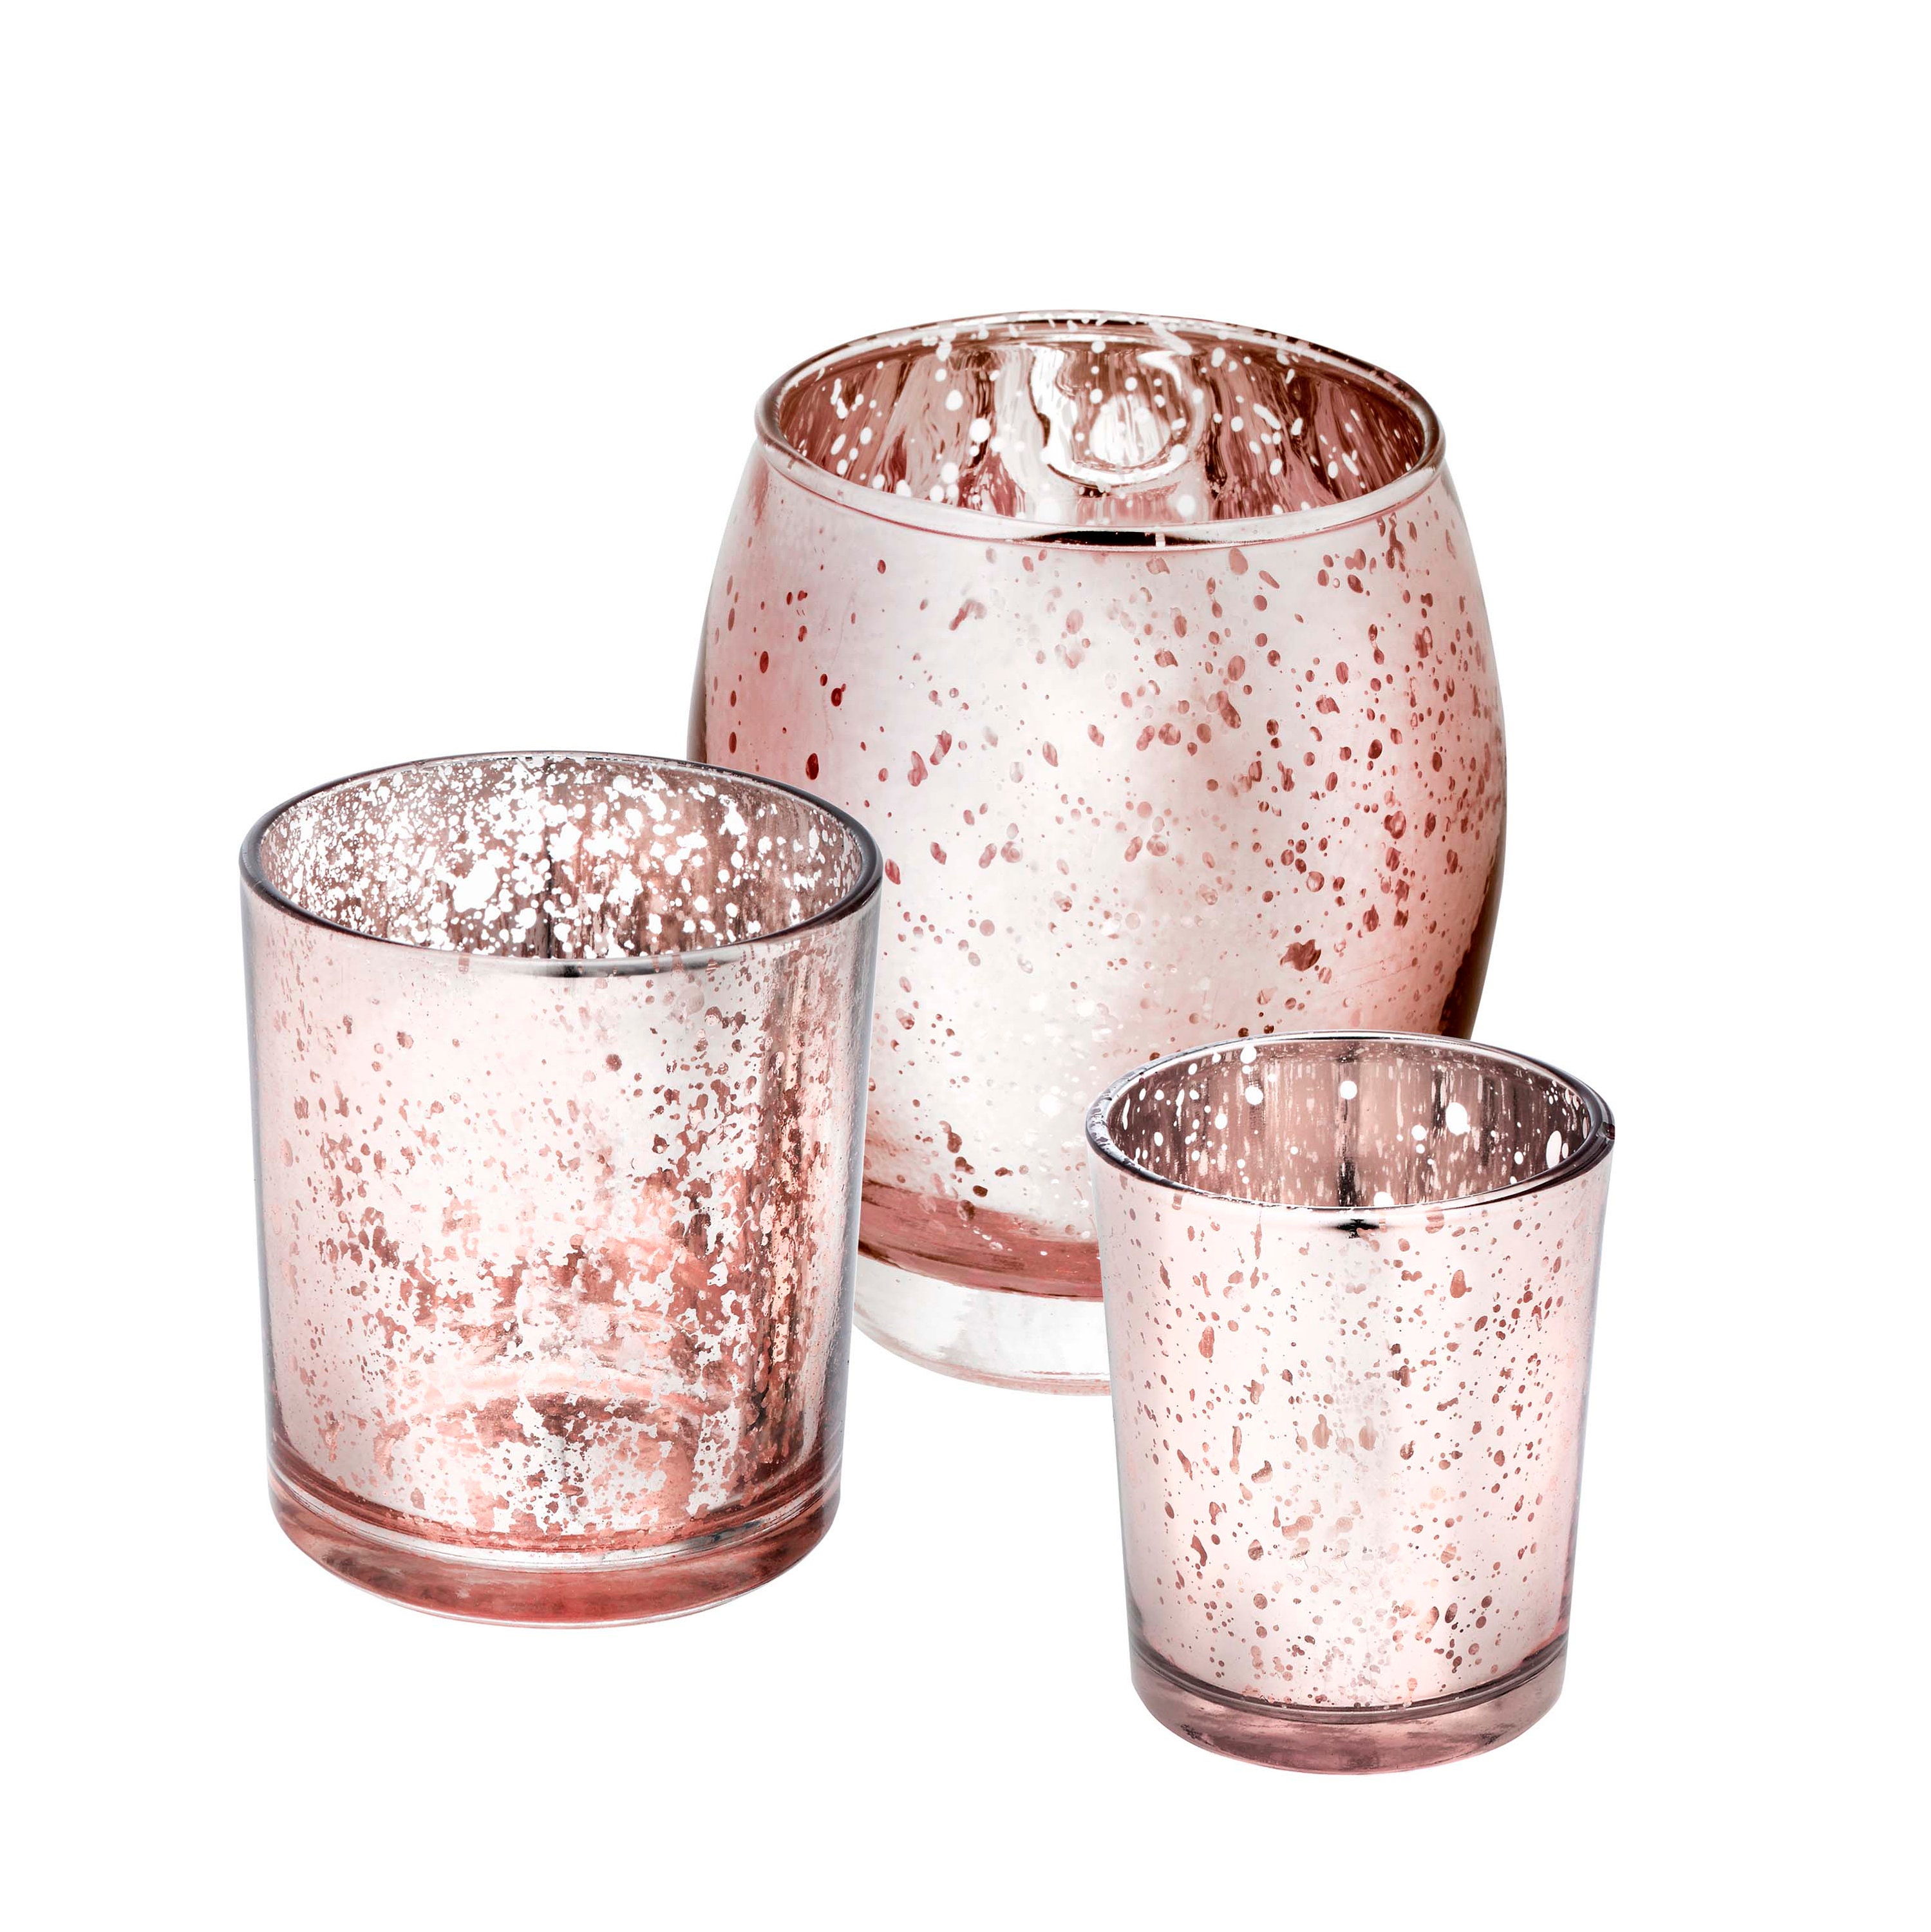 10 Rose Pink Glass Tealight Votive Candle Holder Wedding Party Table Event Decor 